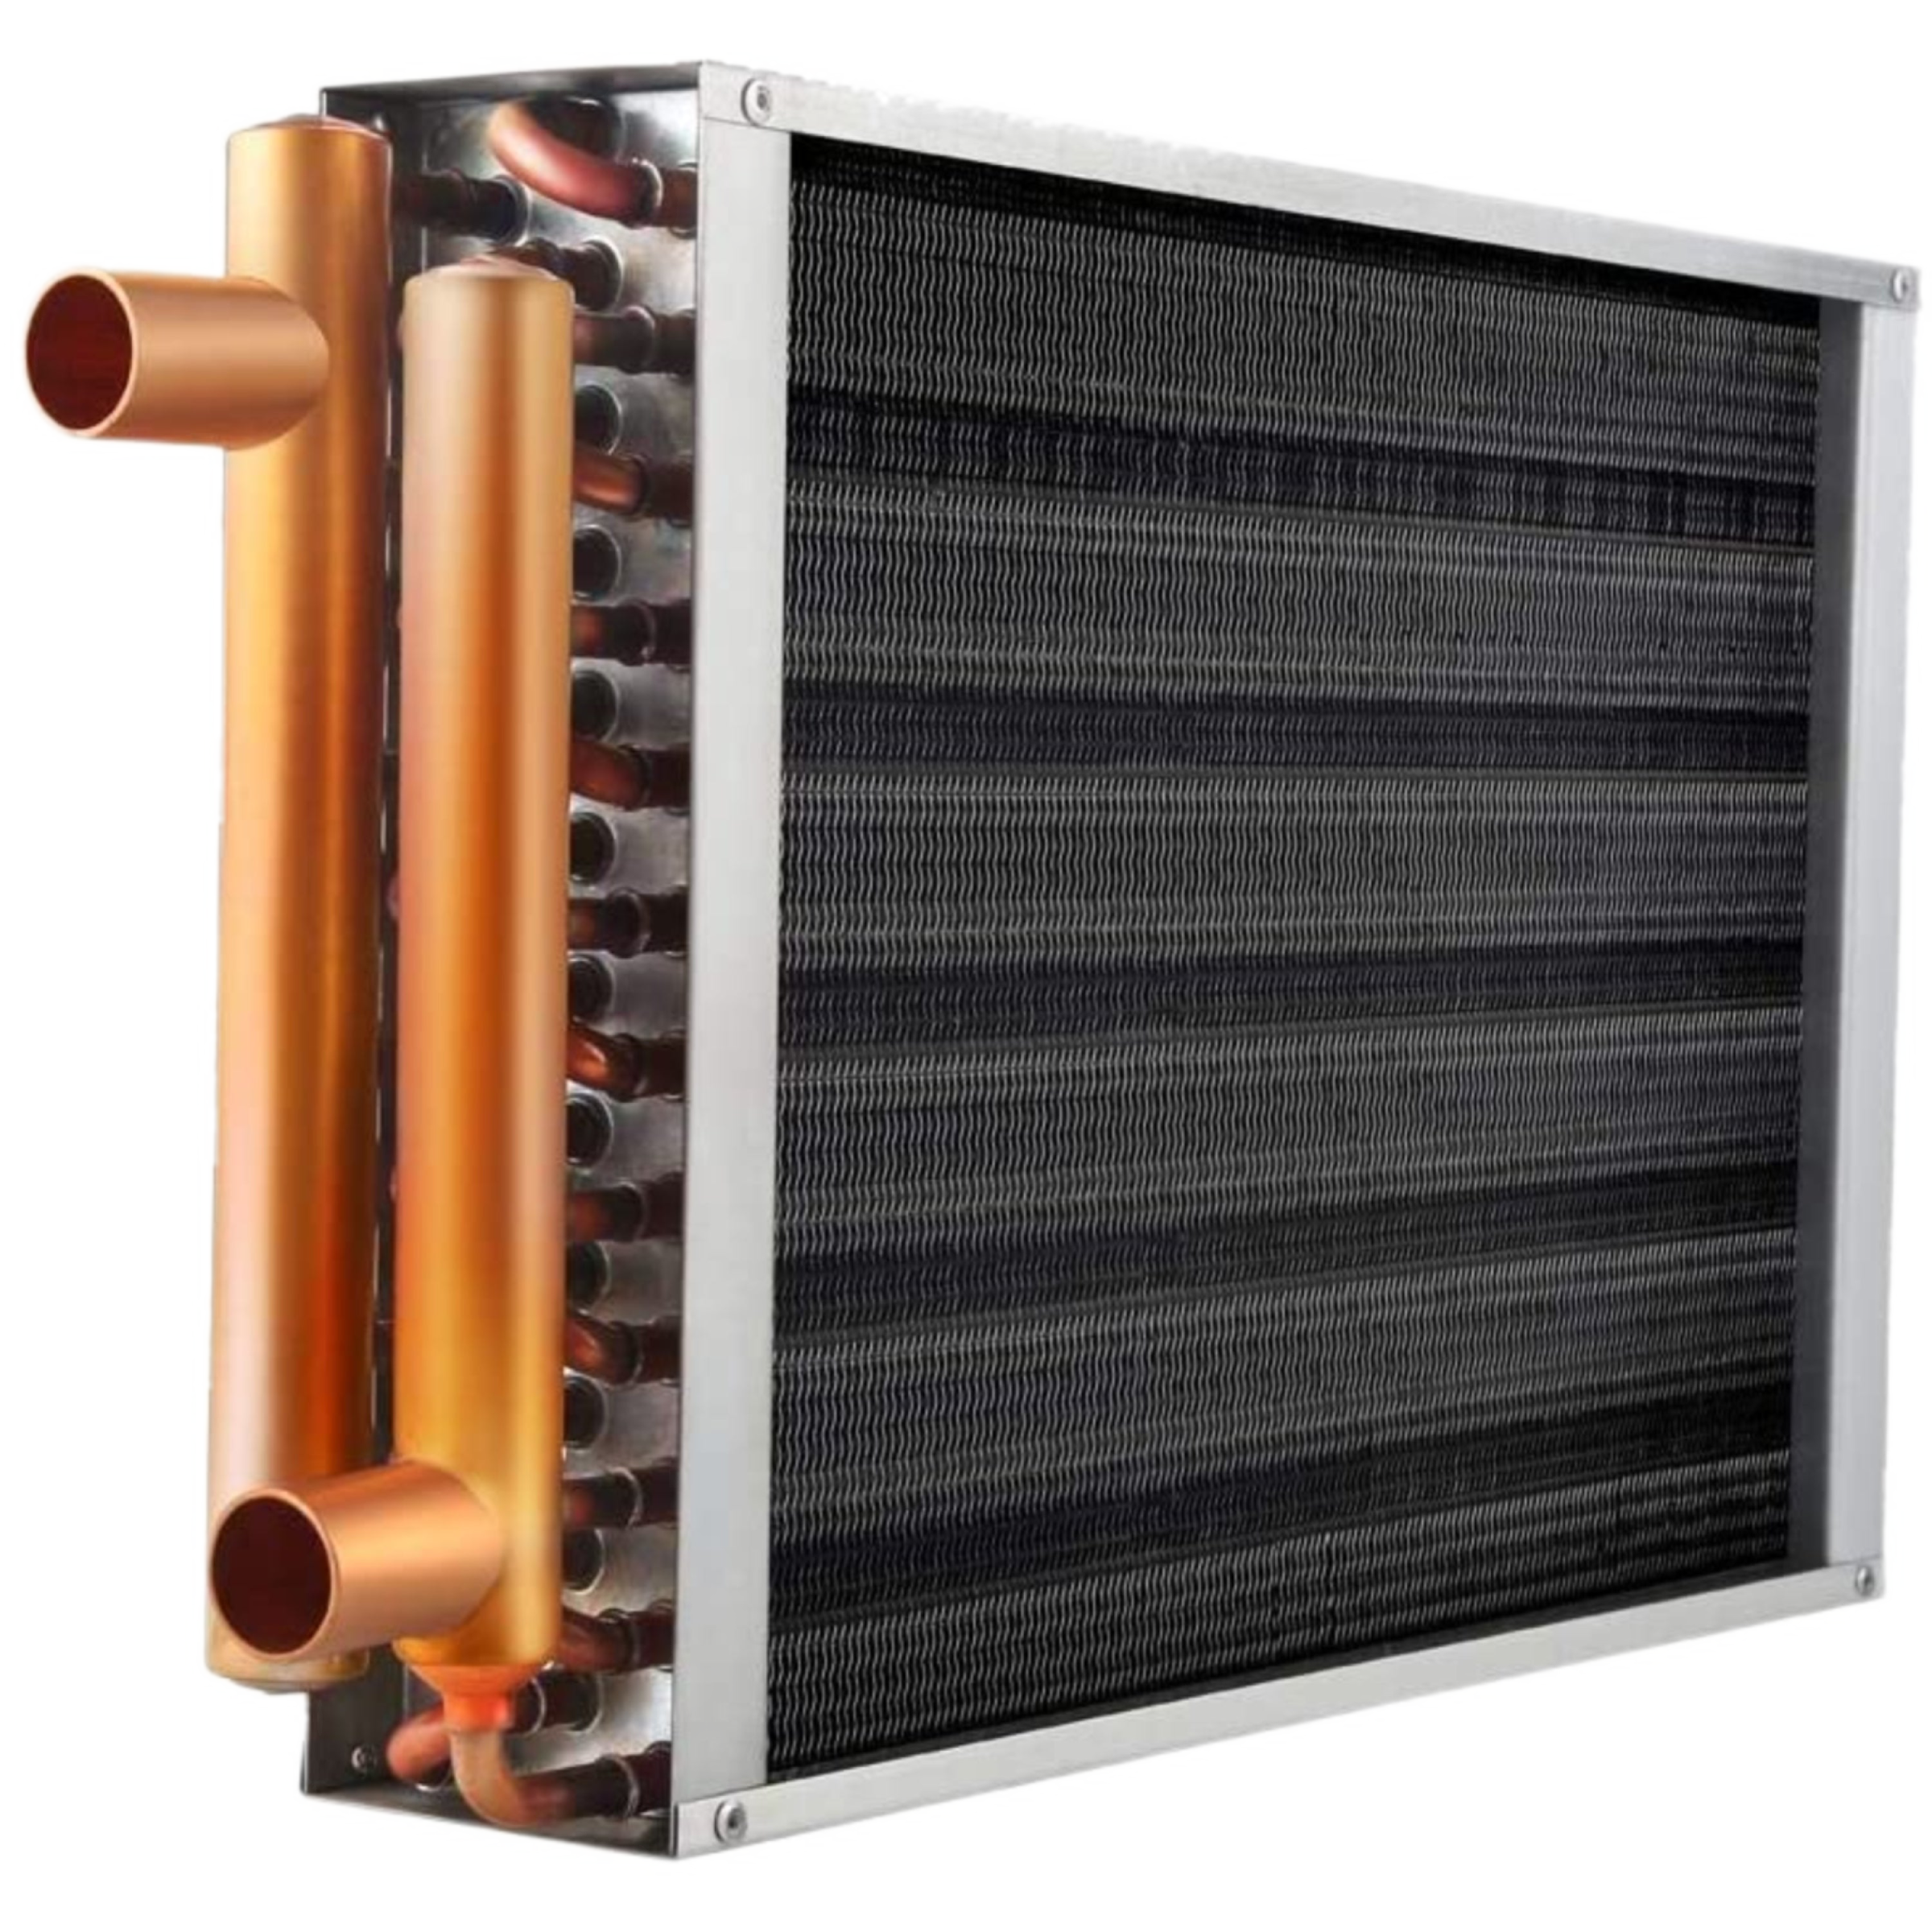 HTL 19 X 20 Hydronic Coil Air to Water Heat Exchanger 15GPM, PD 1.49 PSI, 138375 BTU/h to 150000 BTU/h